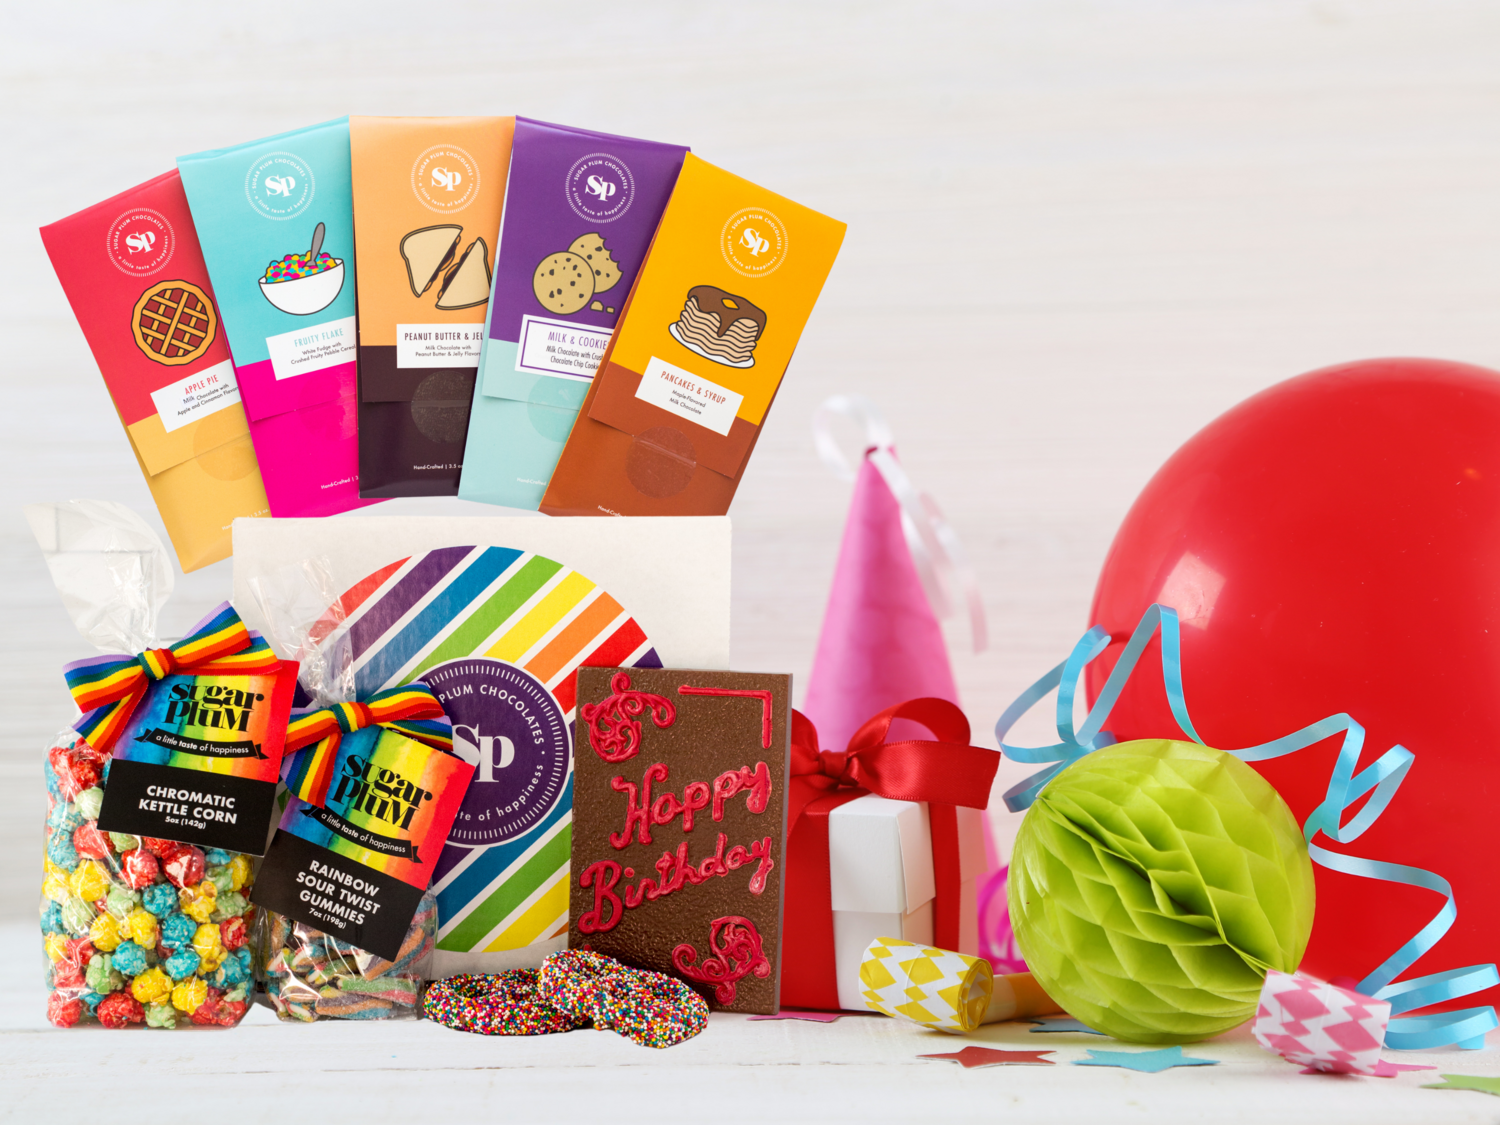 5 Different Snazzy Gift Baskets for Jazz-up Every Birthday!! – GiftaLove.com